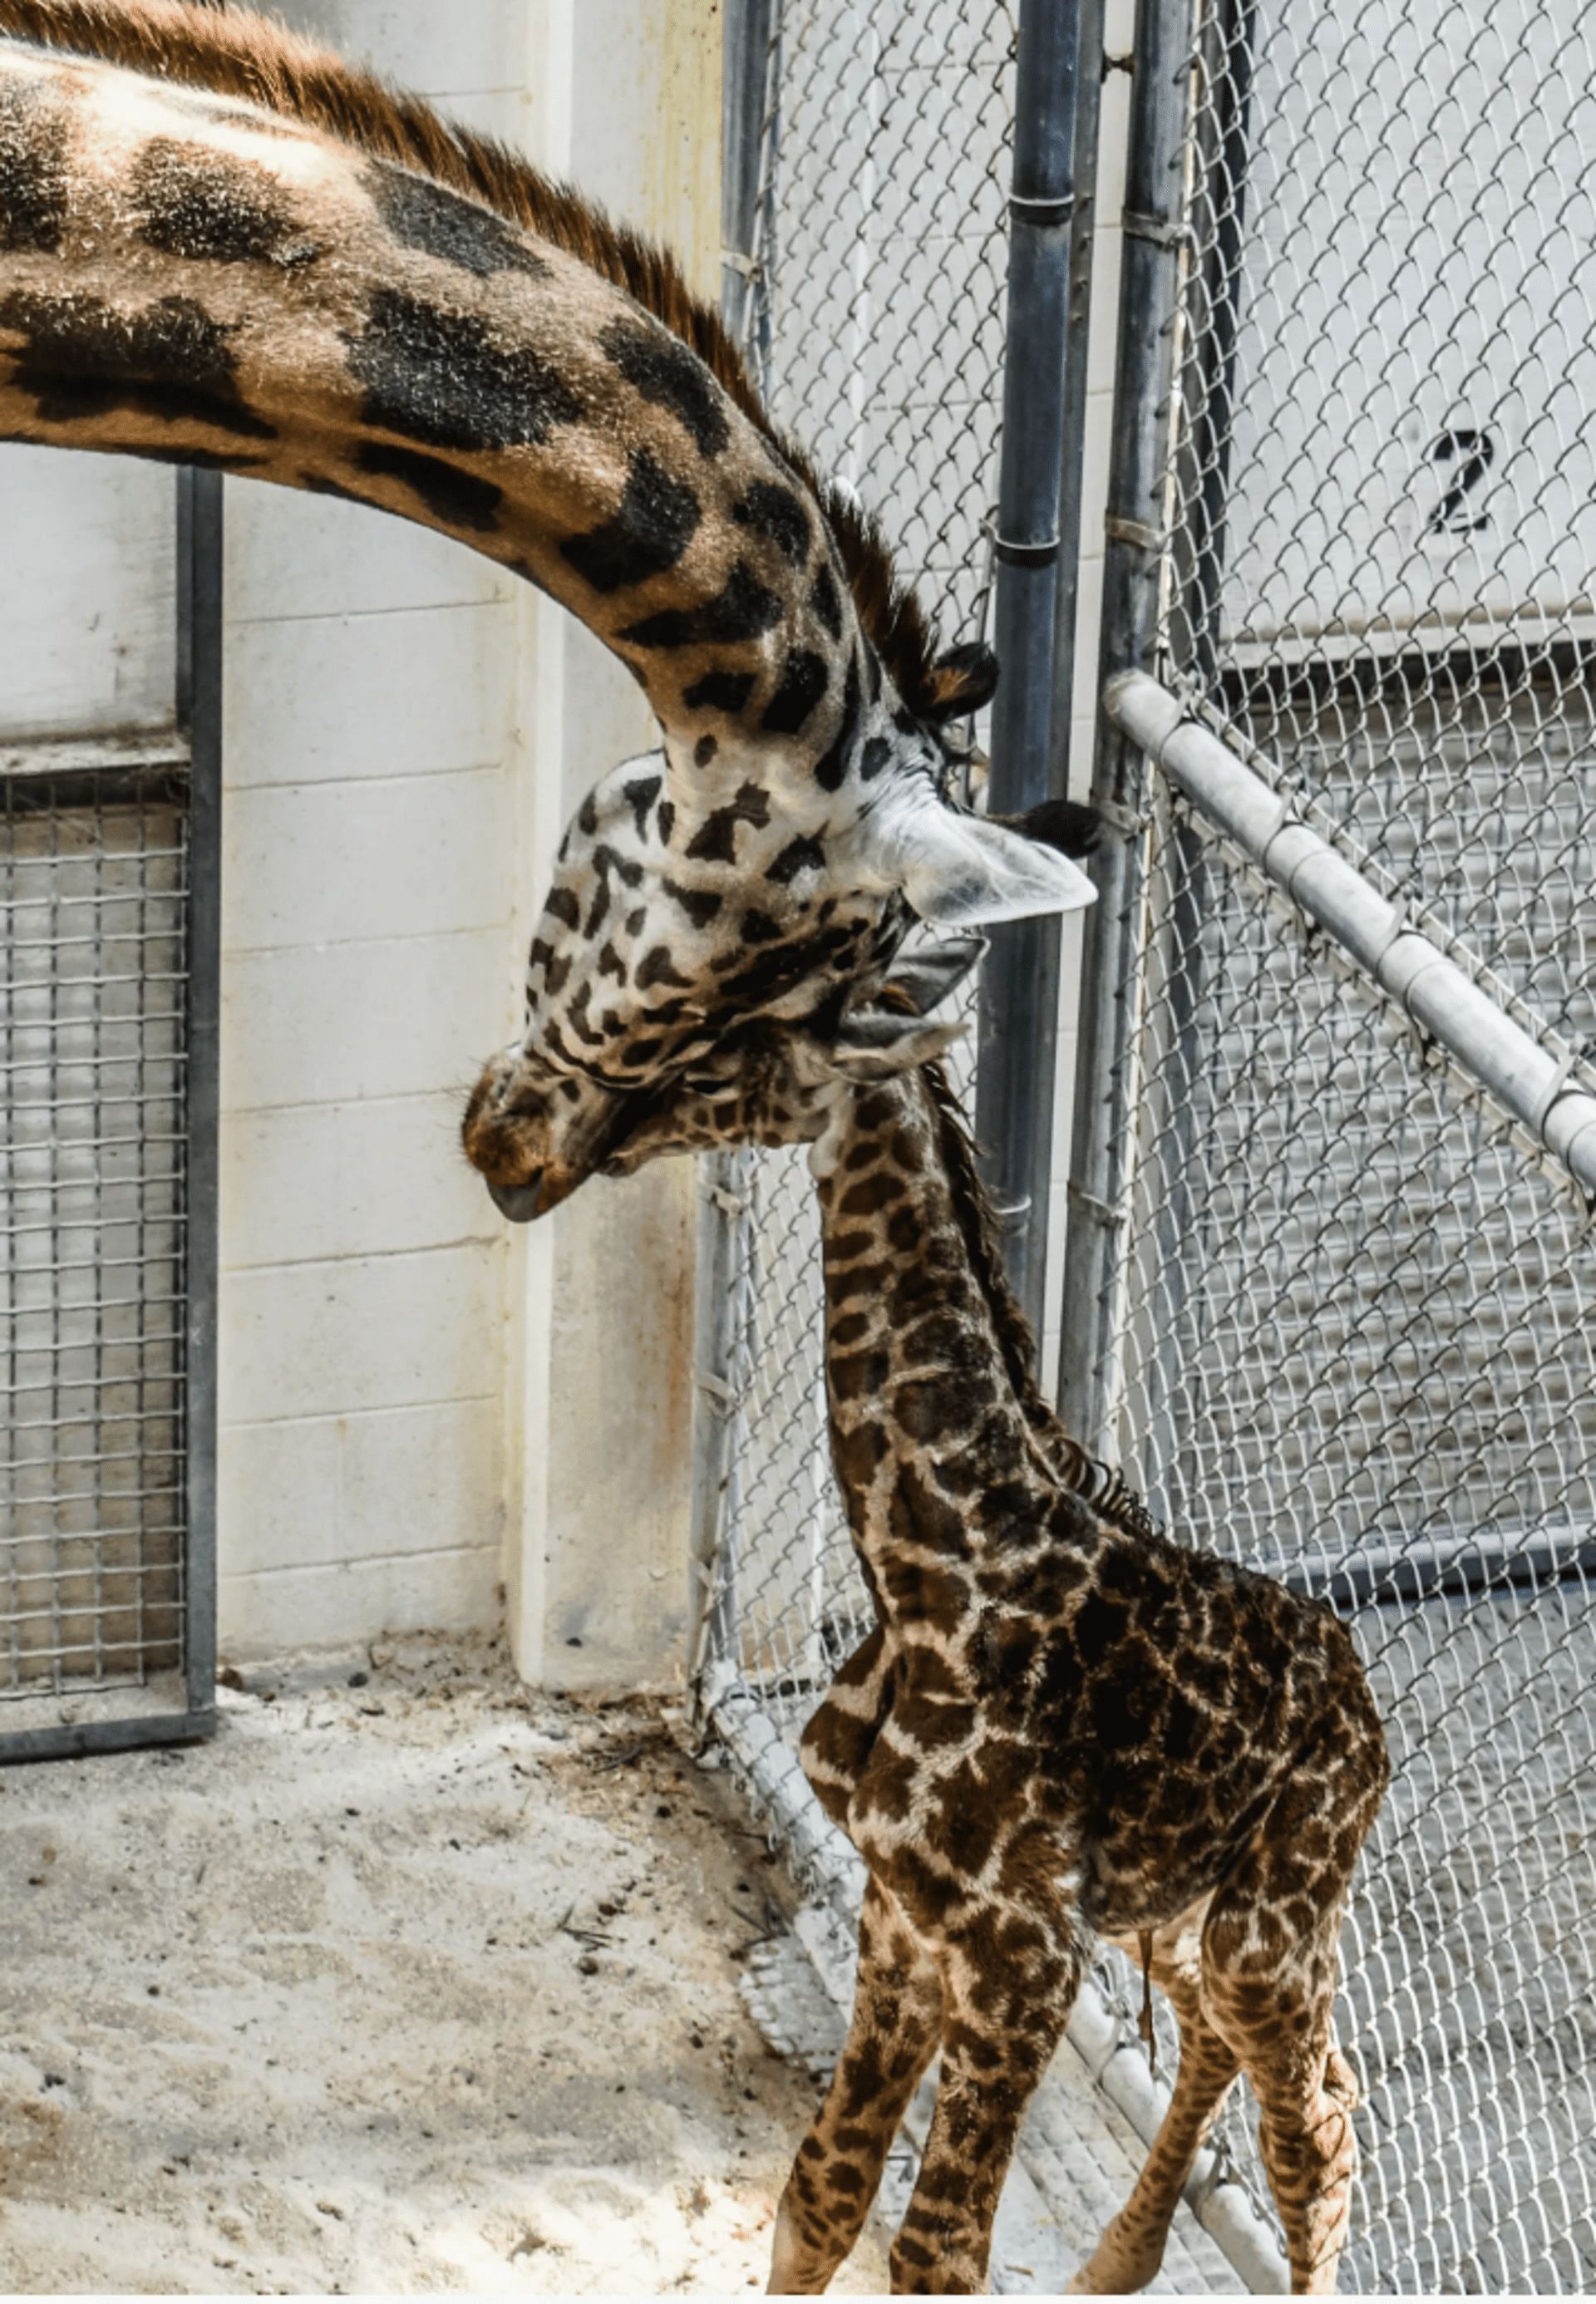 As per the Zoo Authorities, Tisa and her mother, Imara are bonding well. (Image via Virginia Zoo Authories/ Facebook)